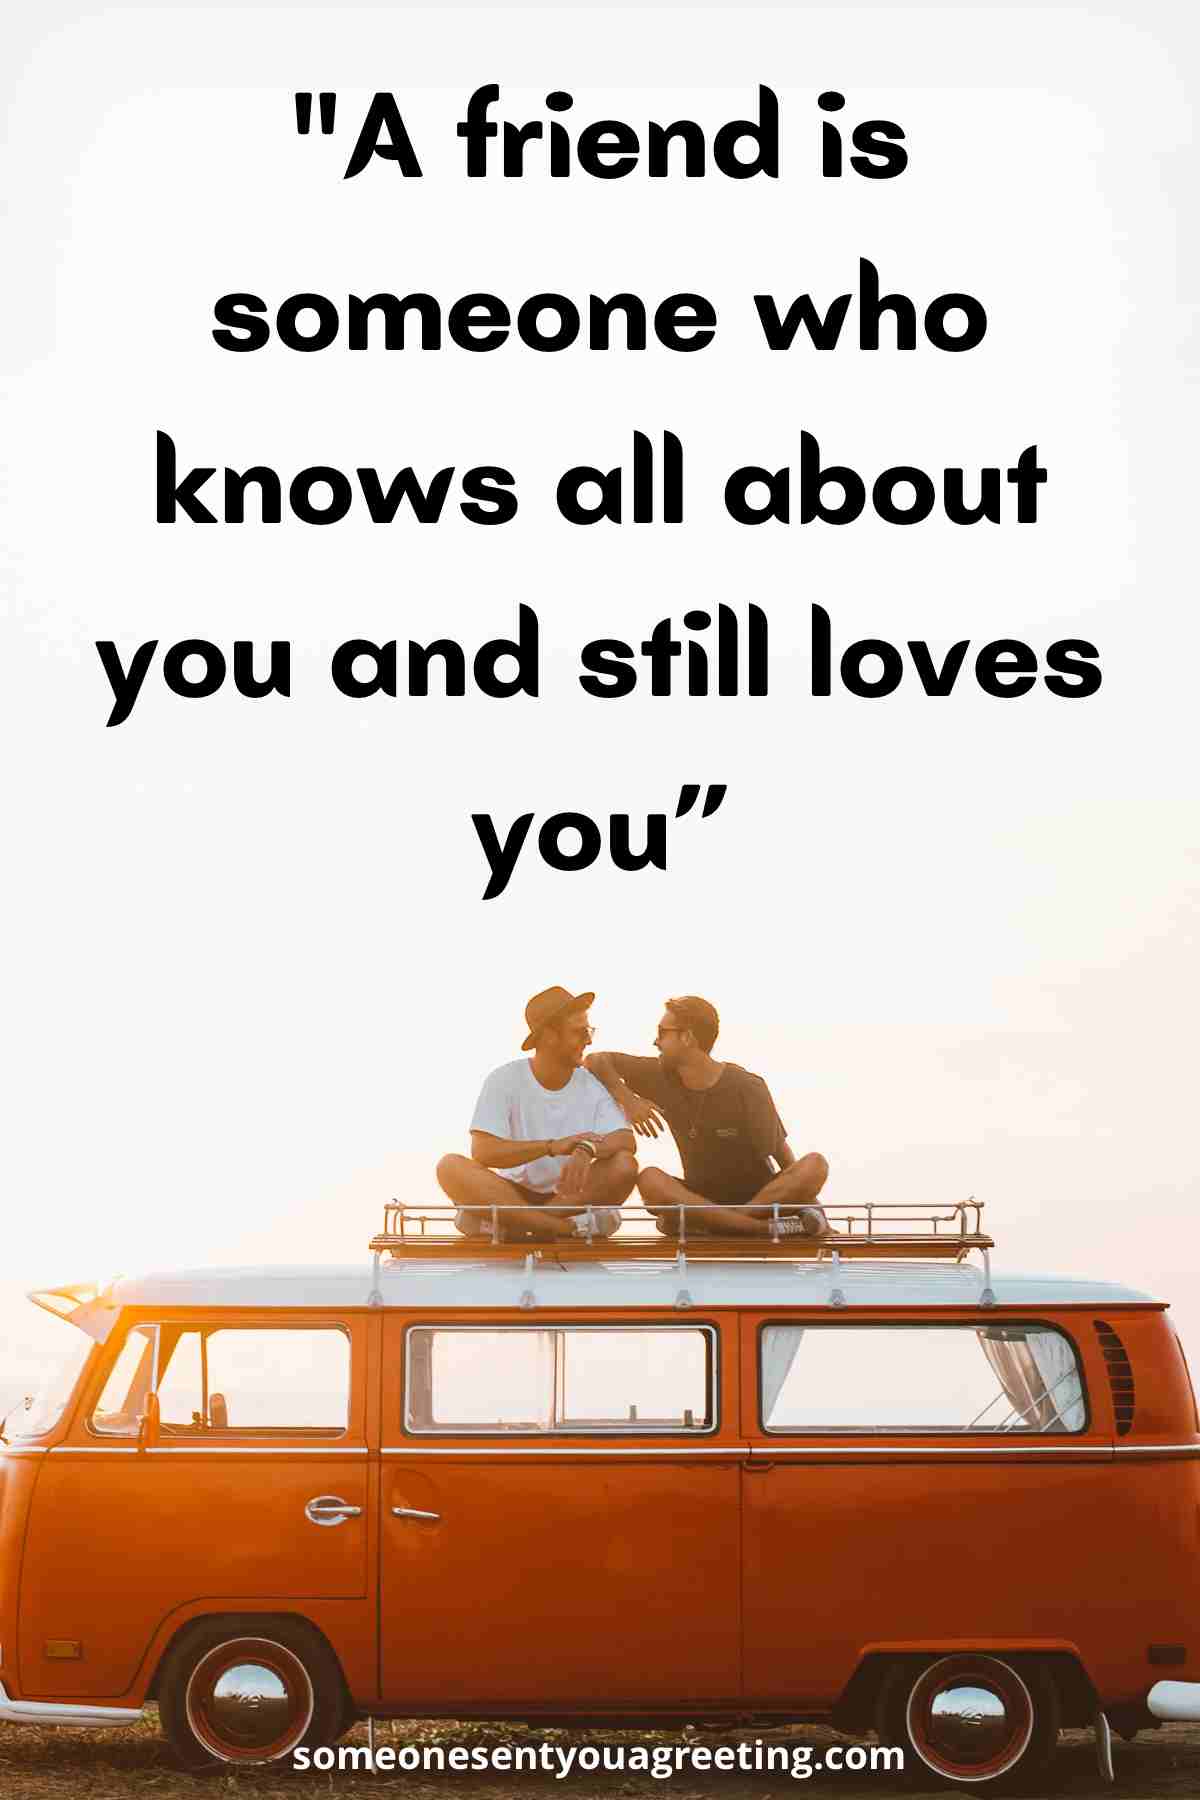 55+ Heart Touching Quotes for Friends to Show You Care - Someone Sent ...